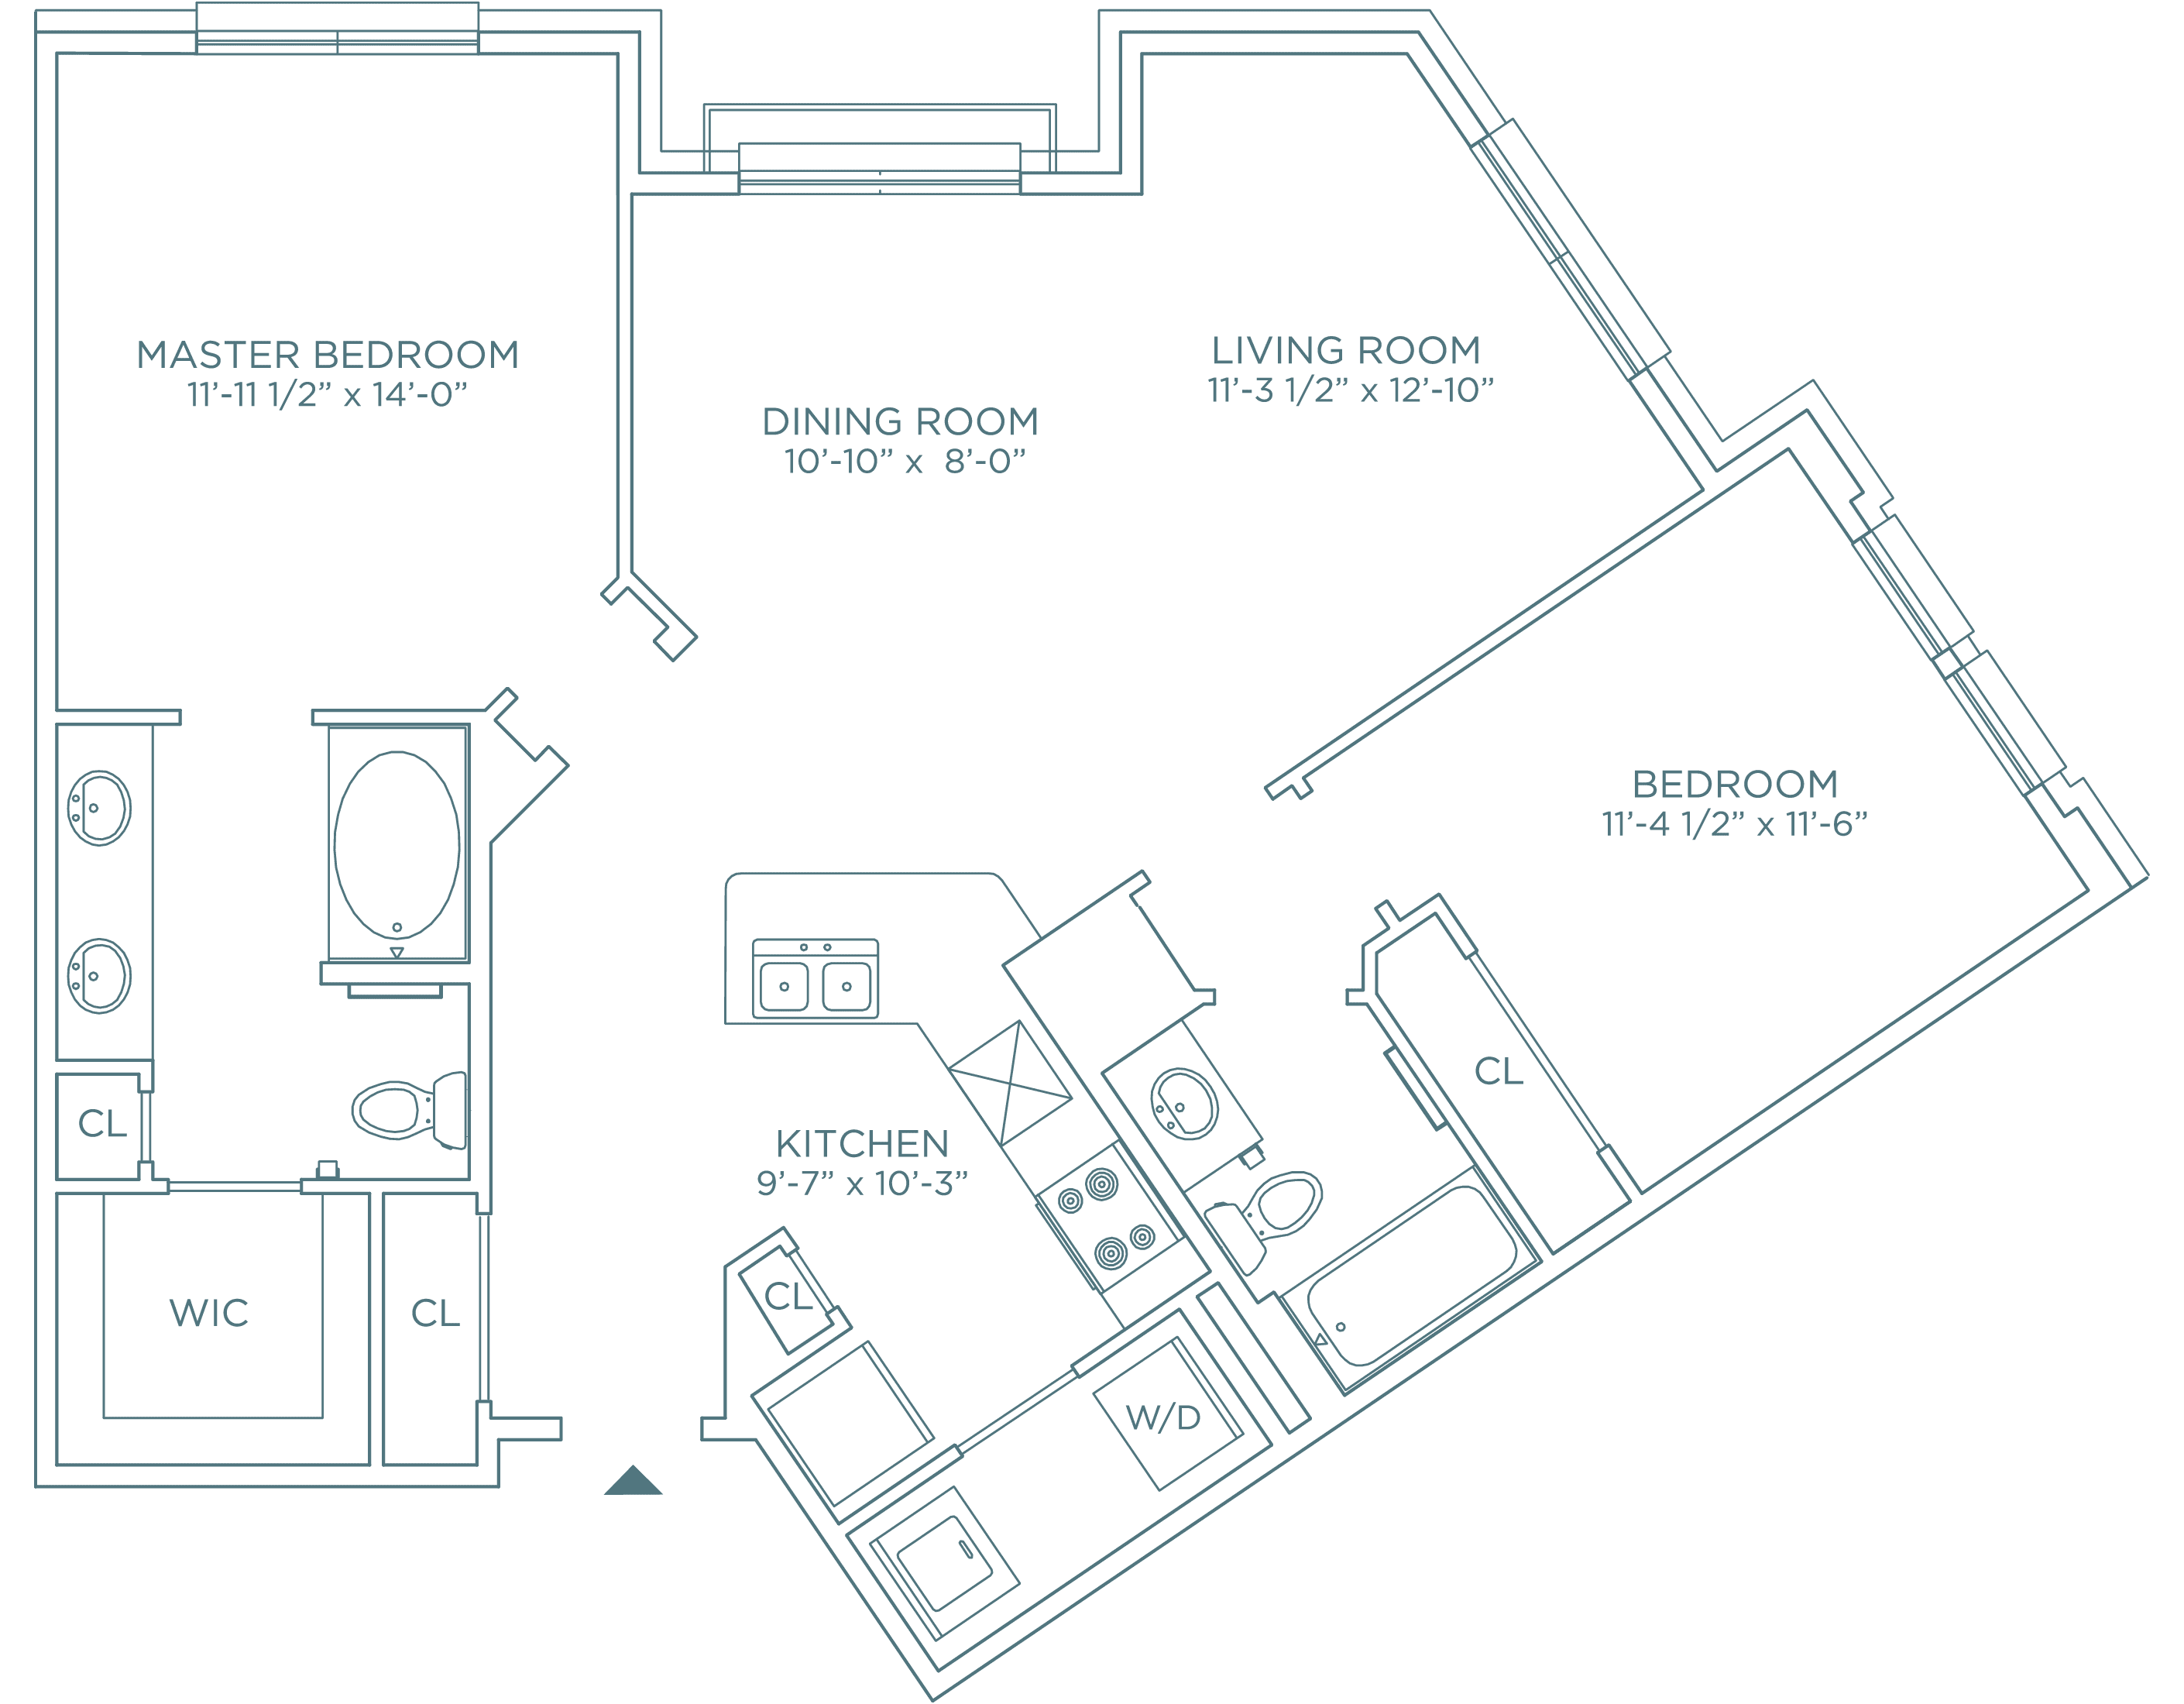 The Preserve Apartments - Residence H - 2 bedroom, 2 bathroom floorplan with walk-in closet in master and spacious living area.